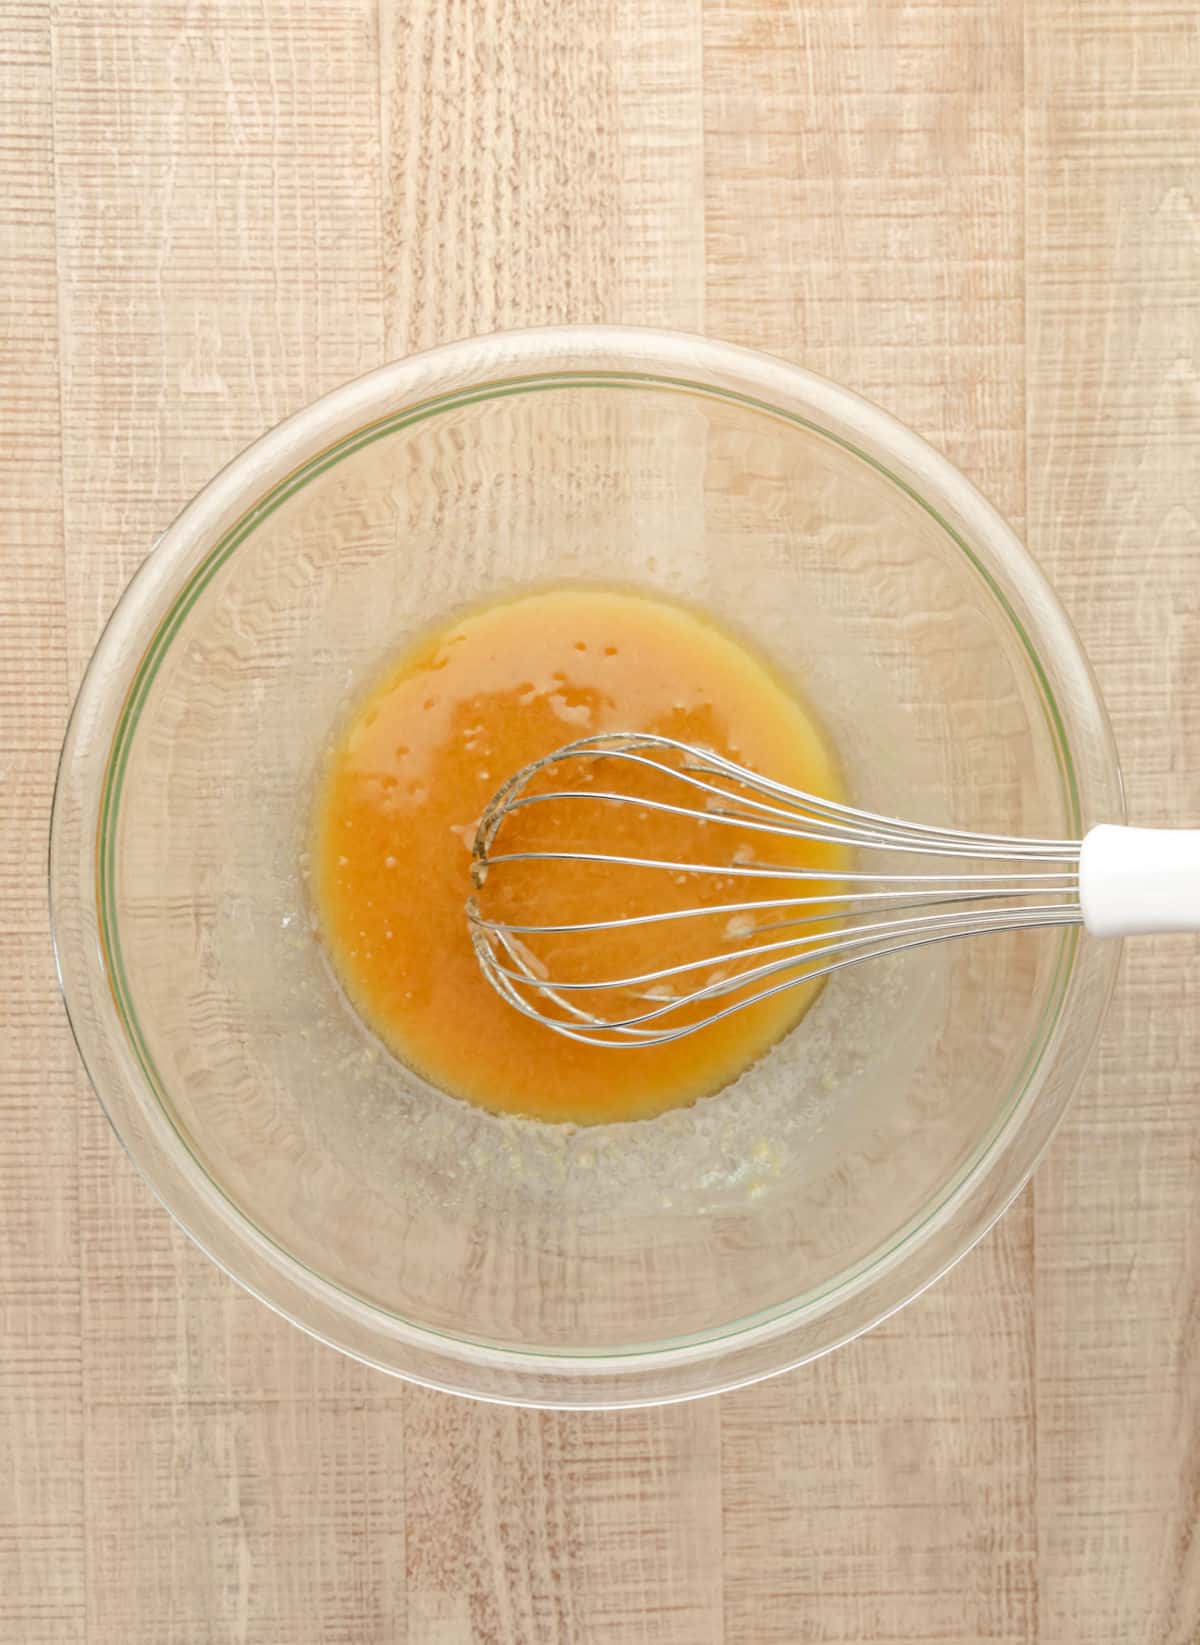 Brown sugar and granulated sugar whisked into melted butter. 